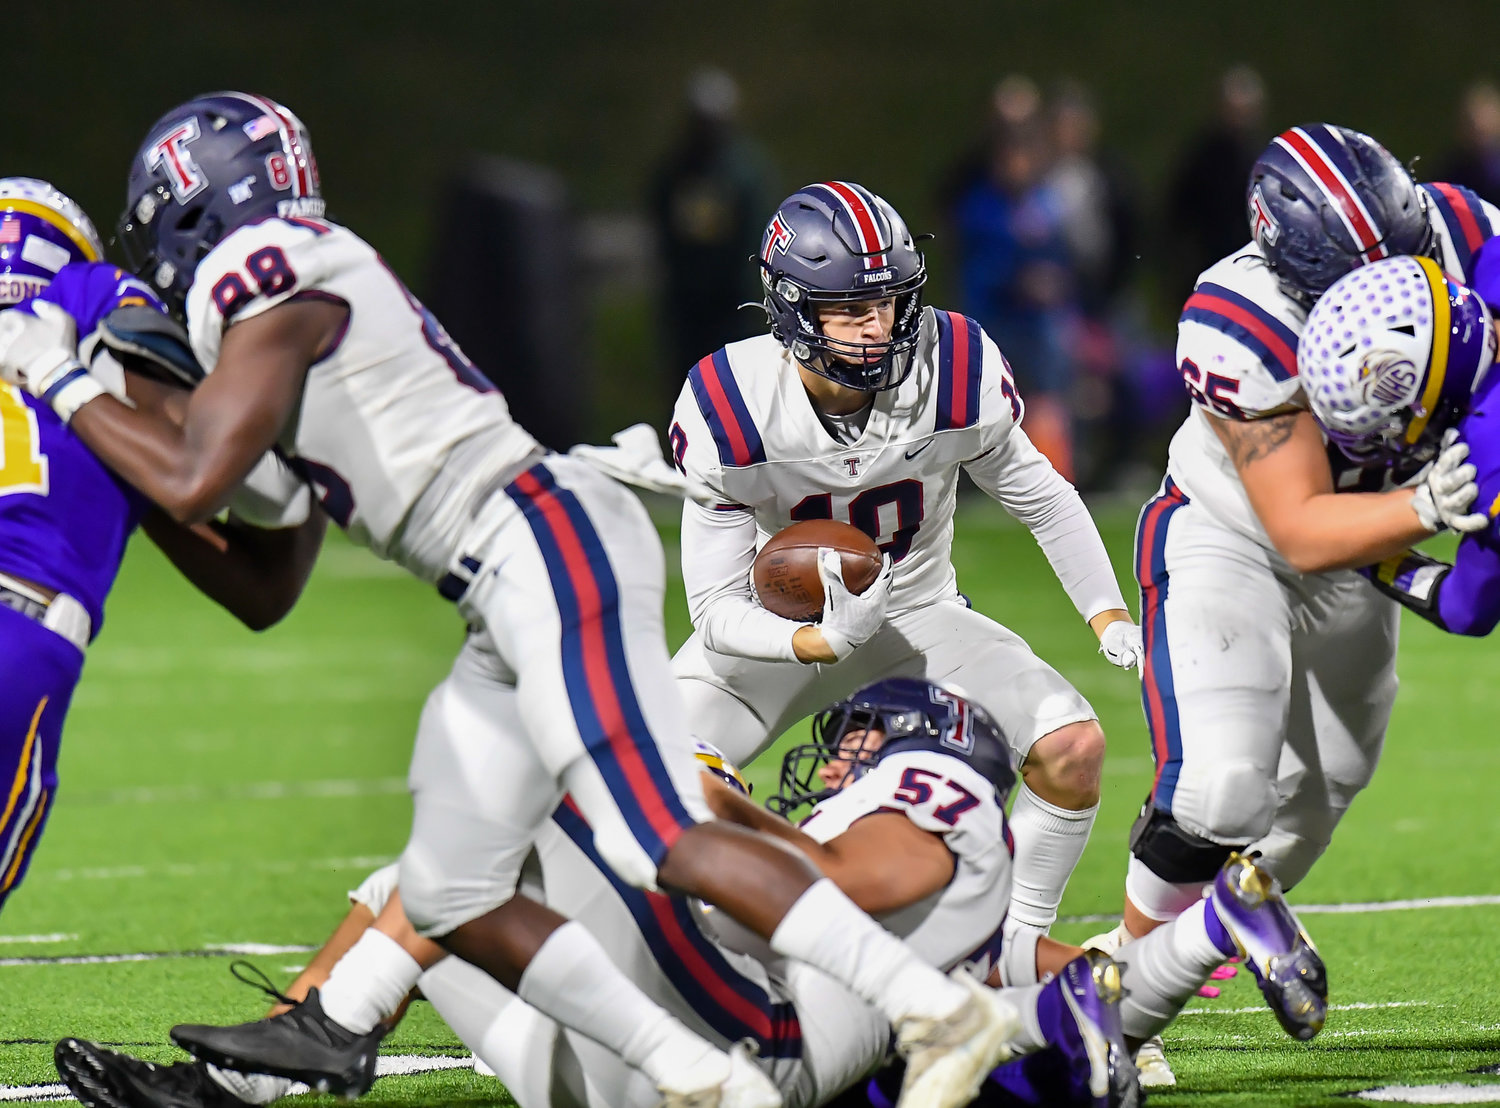 Houston Tx. Nov 19, 2021: Tompkins #10 Wyatt Young gets blocking help from #65 Ethan Vazquez as he carries the ball up the middle during the UIL area playoff game between Tompkins and Jersey Village at Pridgeon Stadium in Houston. (Photo by Mark Goodman / Katy Times)